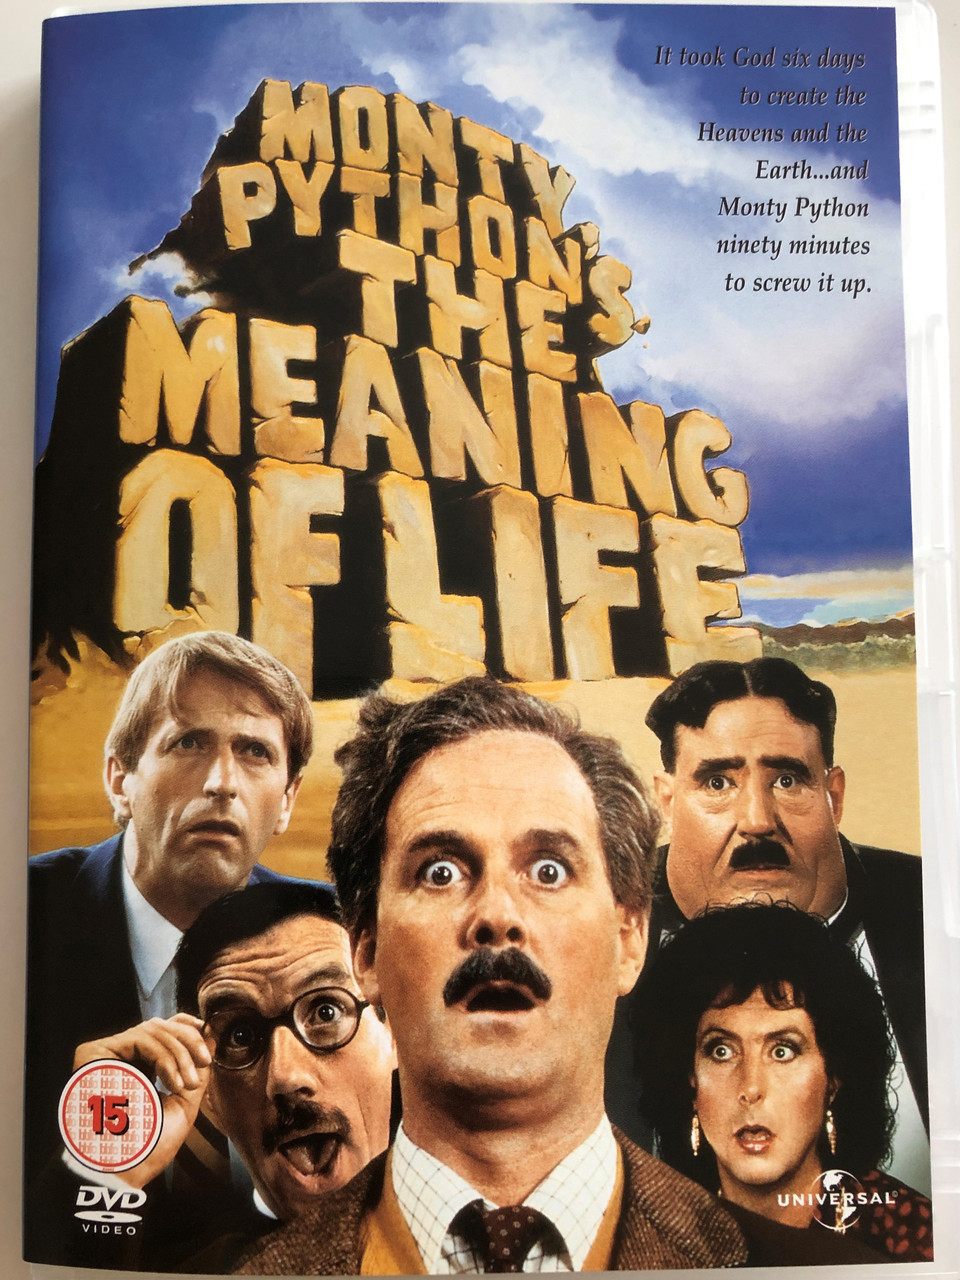 Monty Python's The Meaning of Life DVD 1983 / Directed by Terry Jones /  Starring: Graham Chapman, John Cleese, Terry Gilliam, Eric Idle, Michael  Palin - bibleinmylanguage